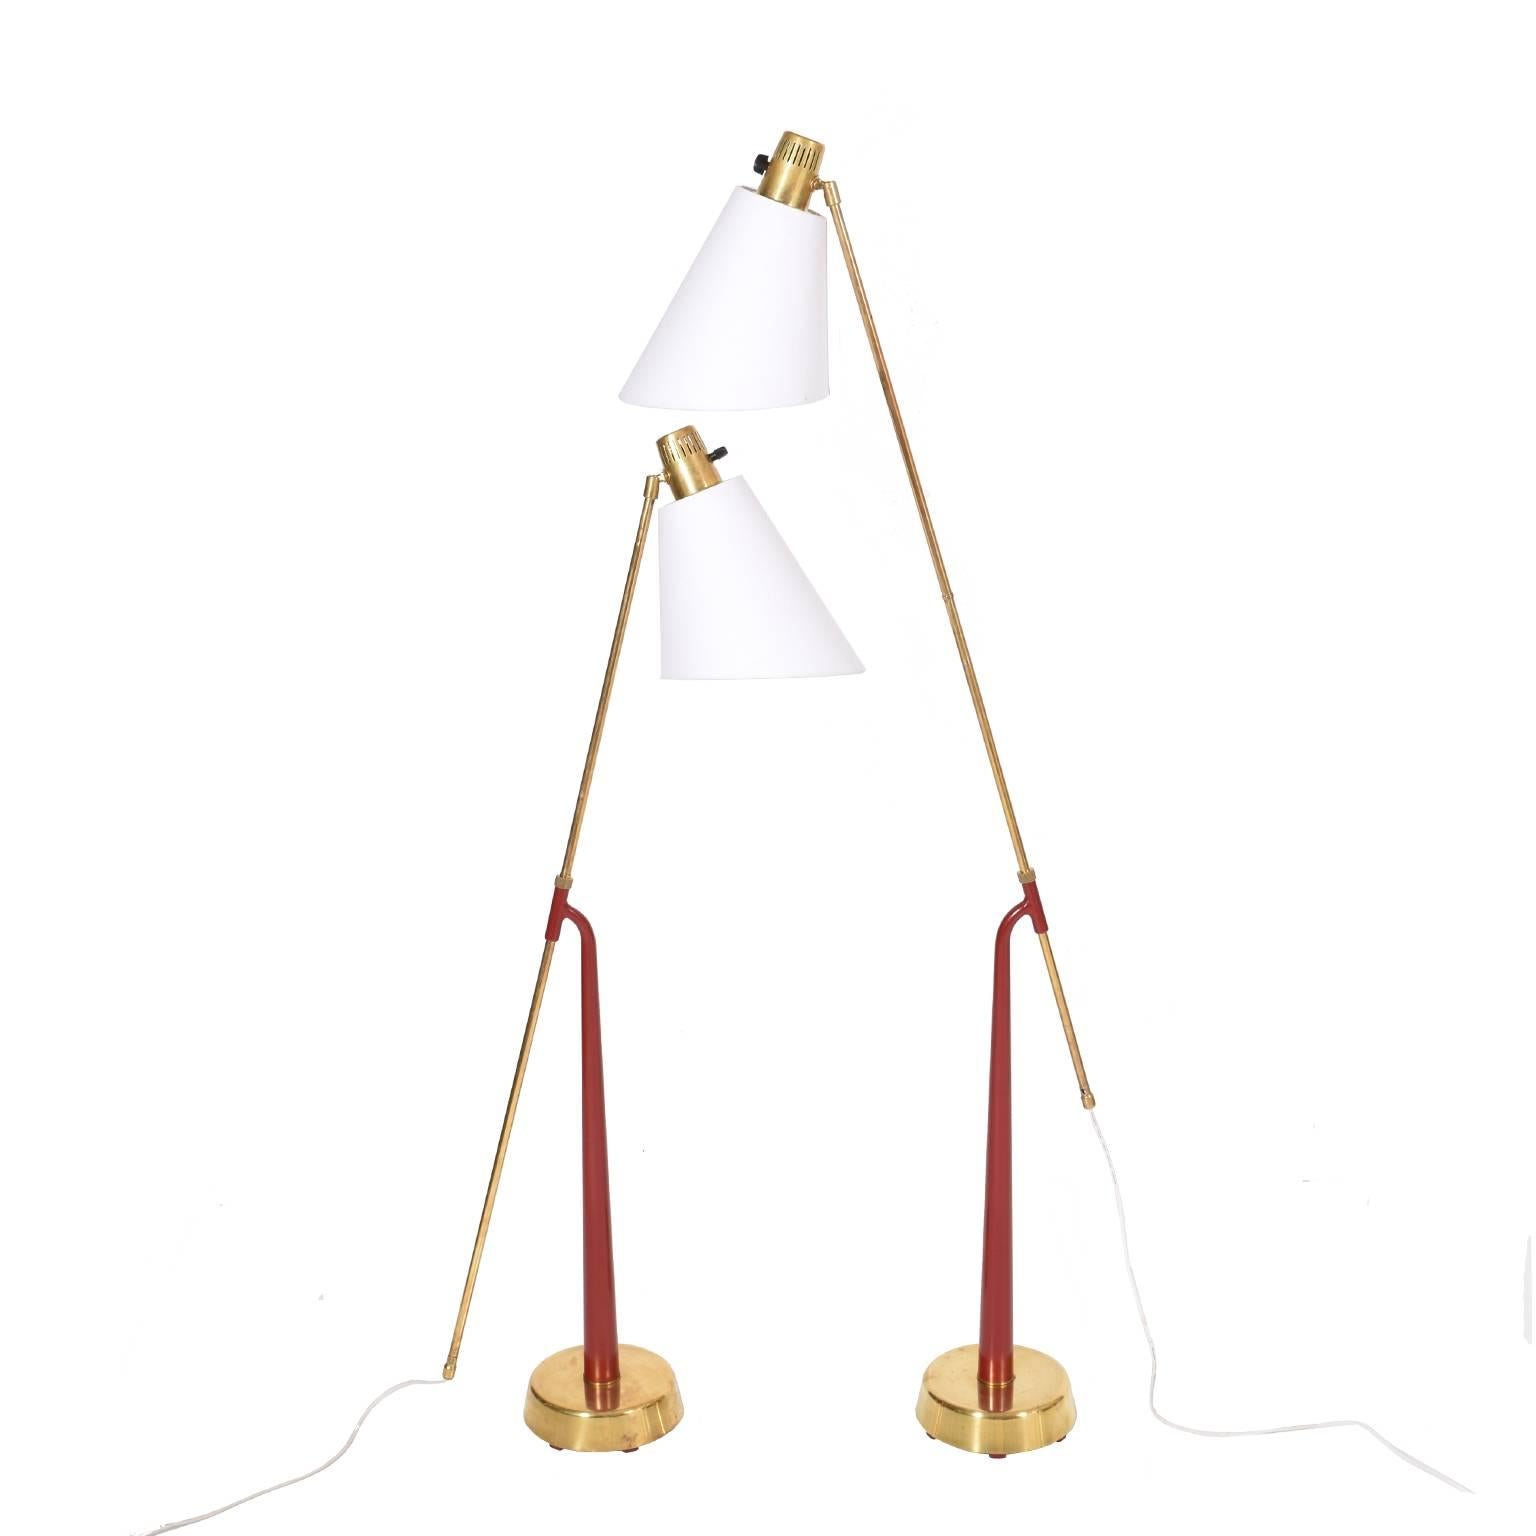 Pair of adjustable lamps, brass and red painted metal stem. Height and shades adjustable. Brass base. Stamped on base 